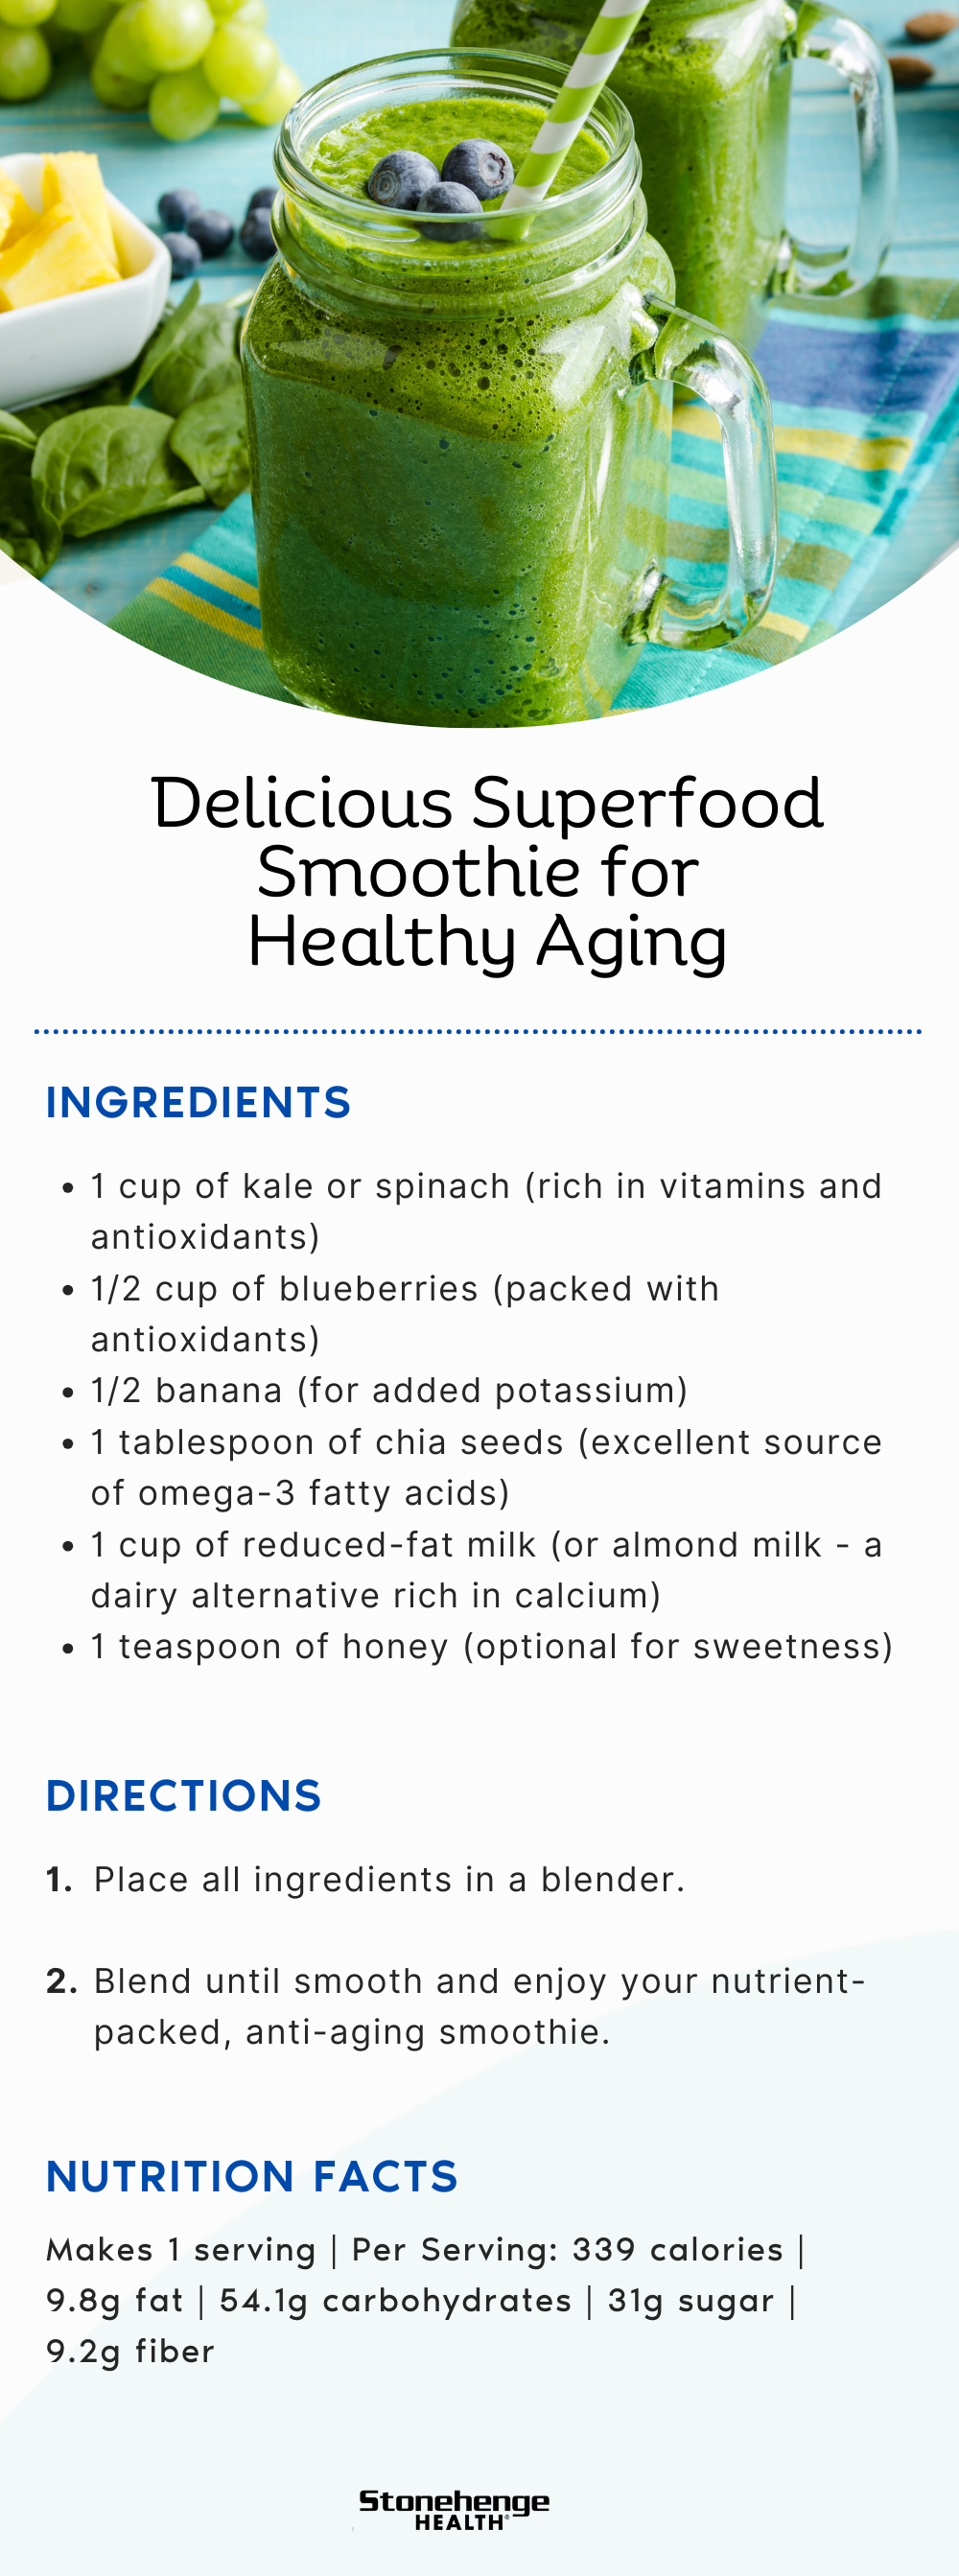 Delicious Superfood Smoothie for Healthy Aging recipe